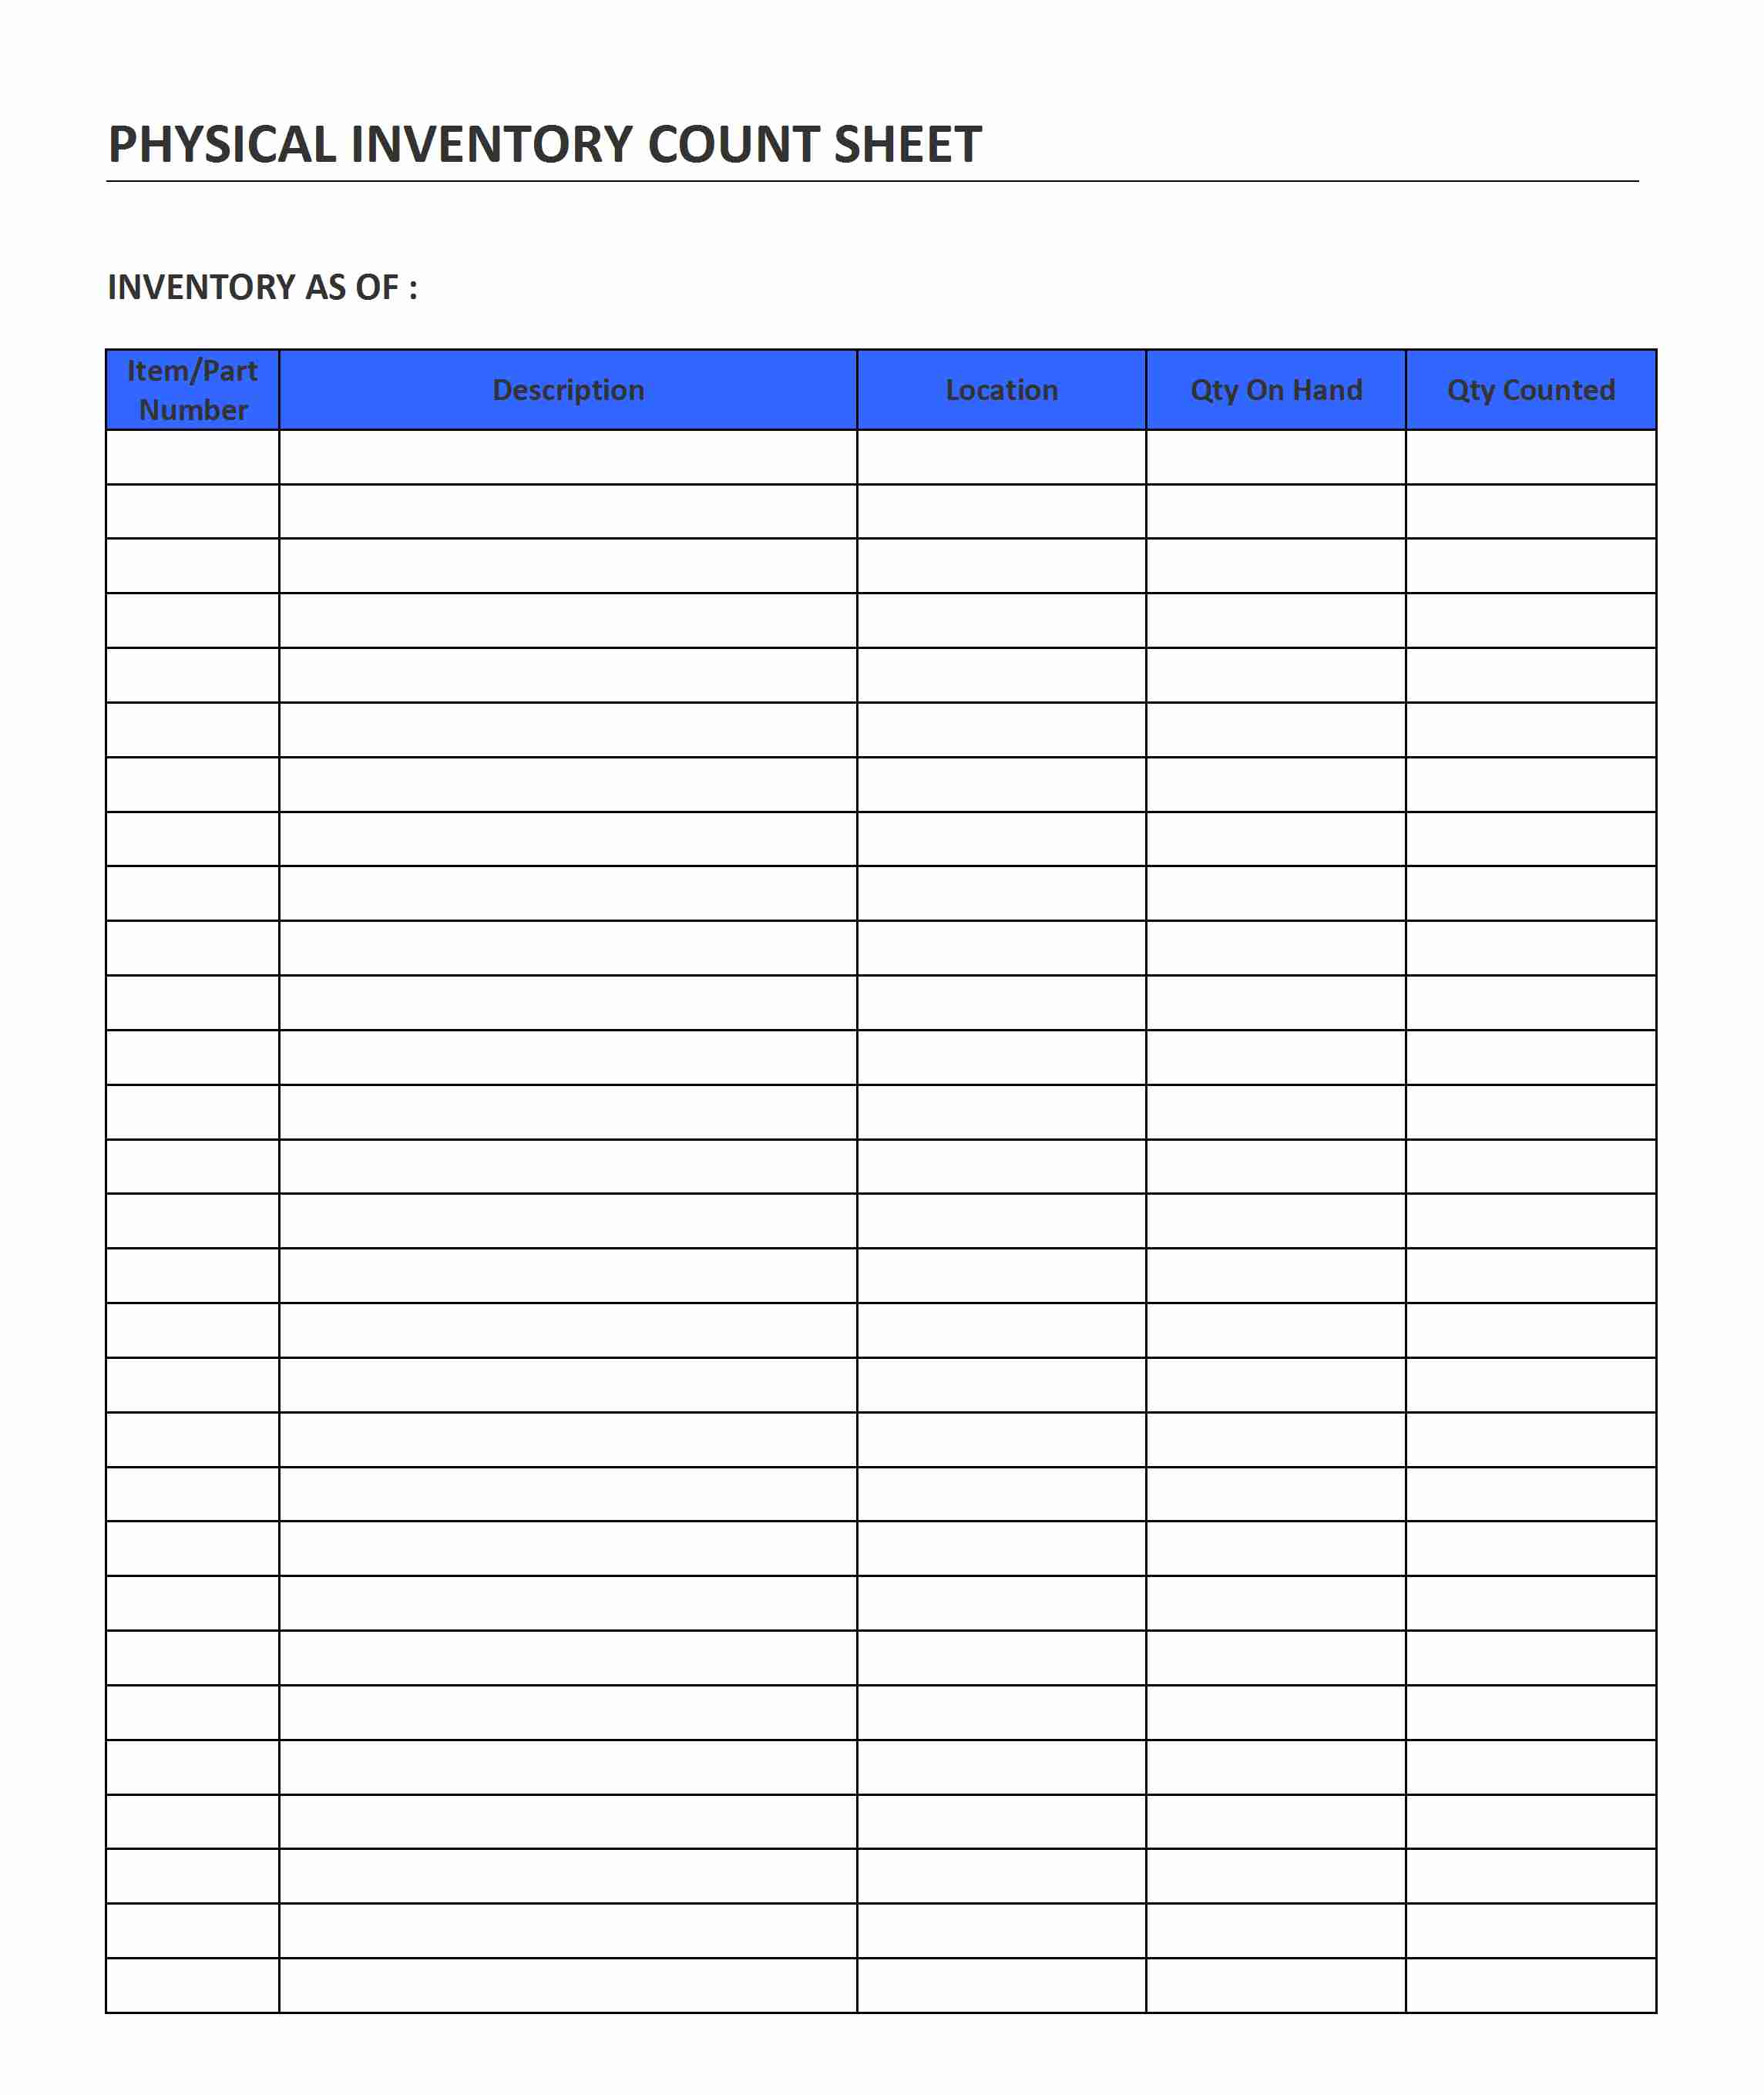 inventory-counting-sheet-example-templates-at-allbusinesstemplates